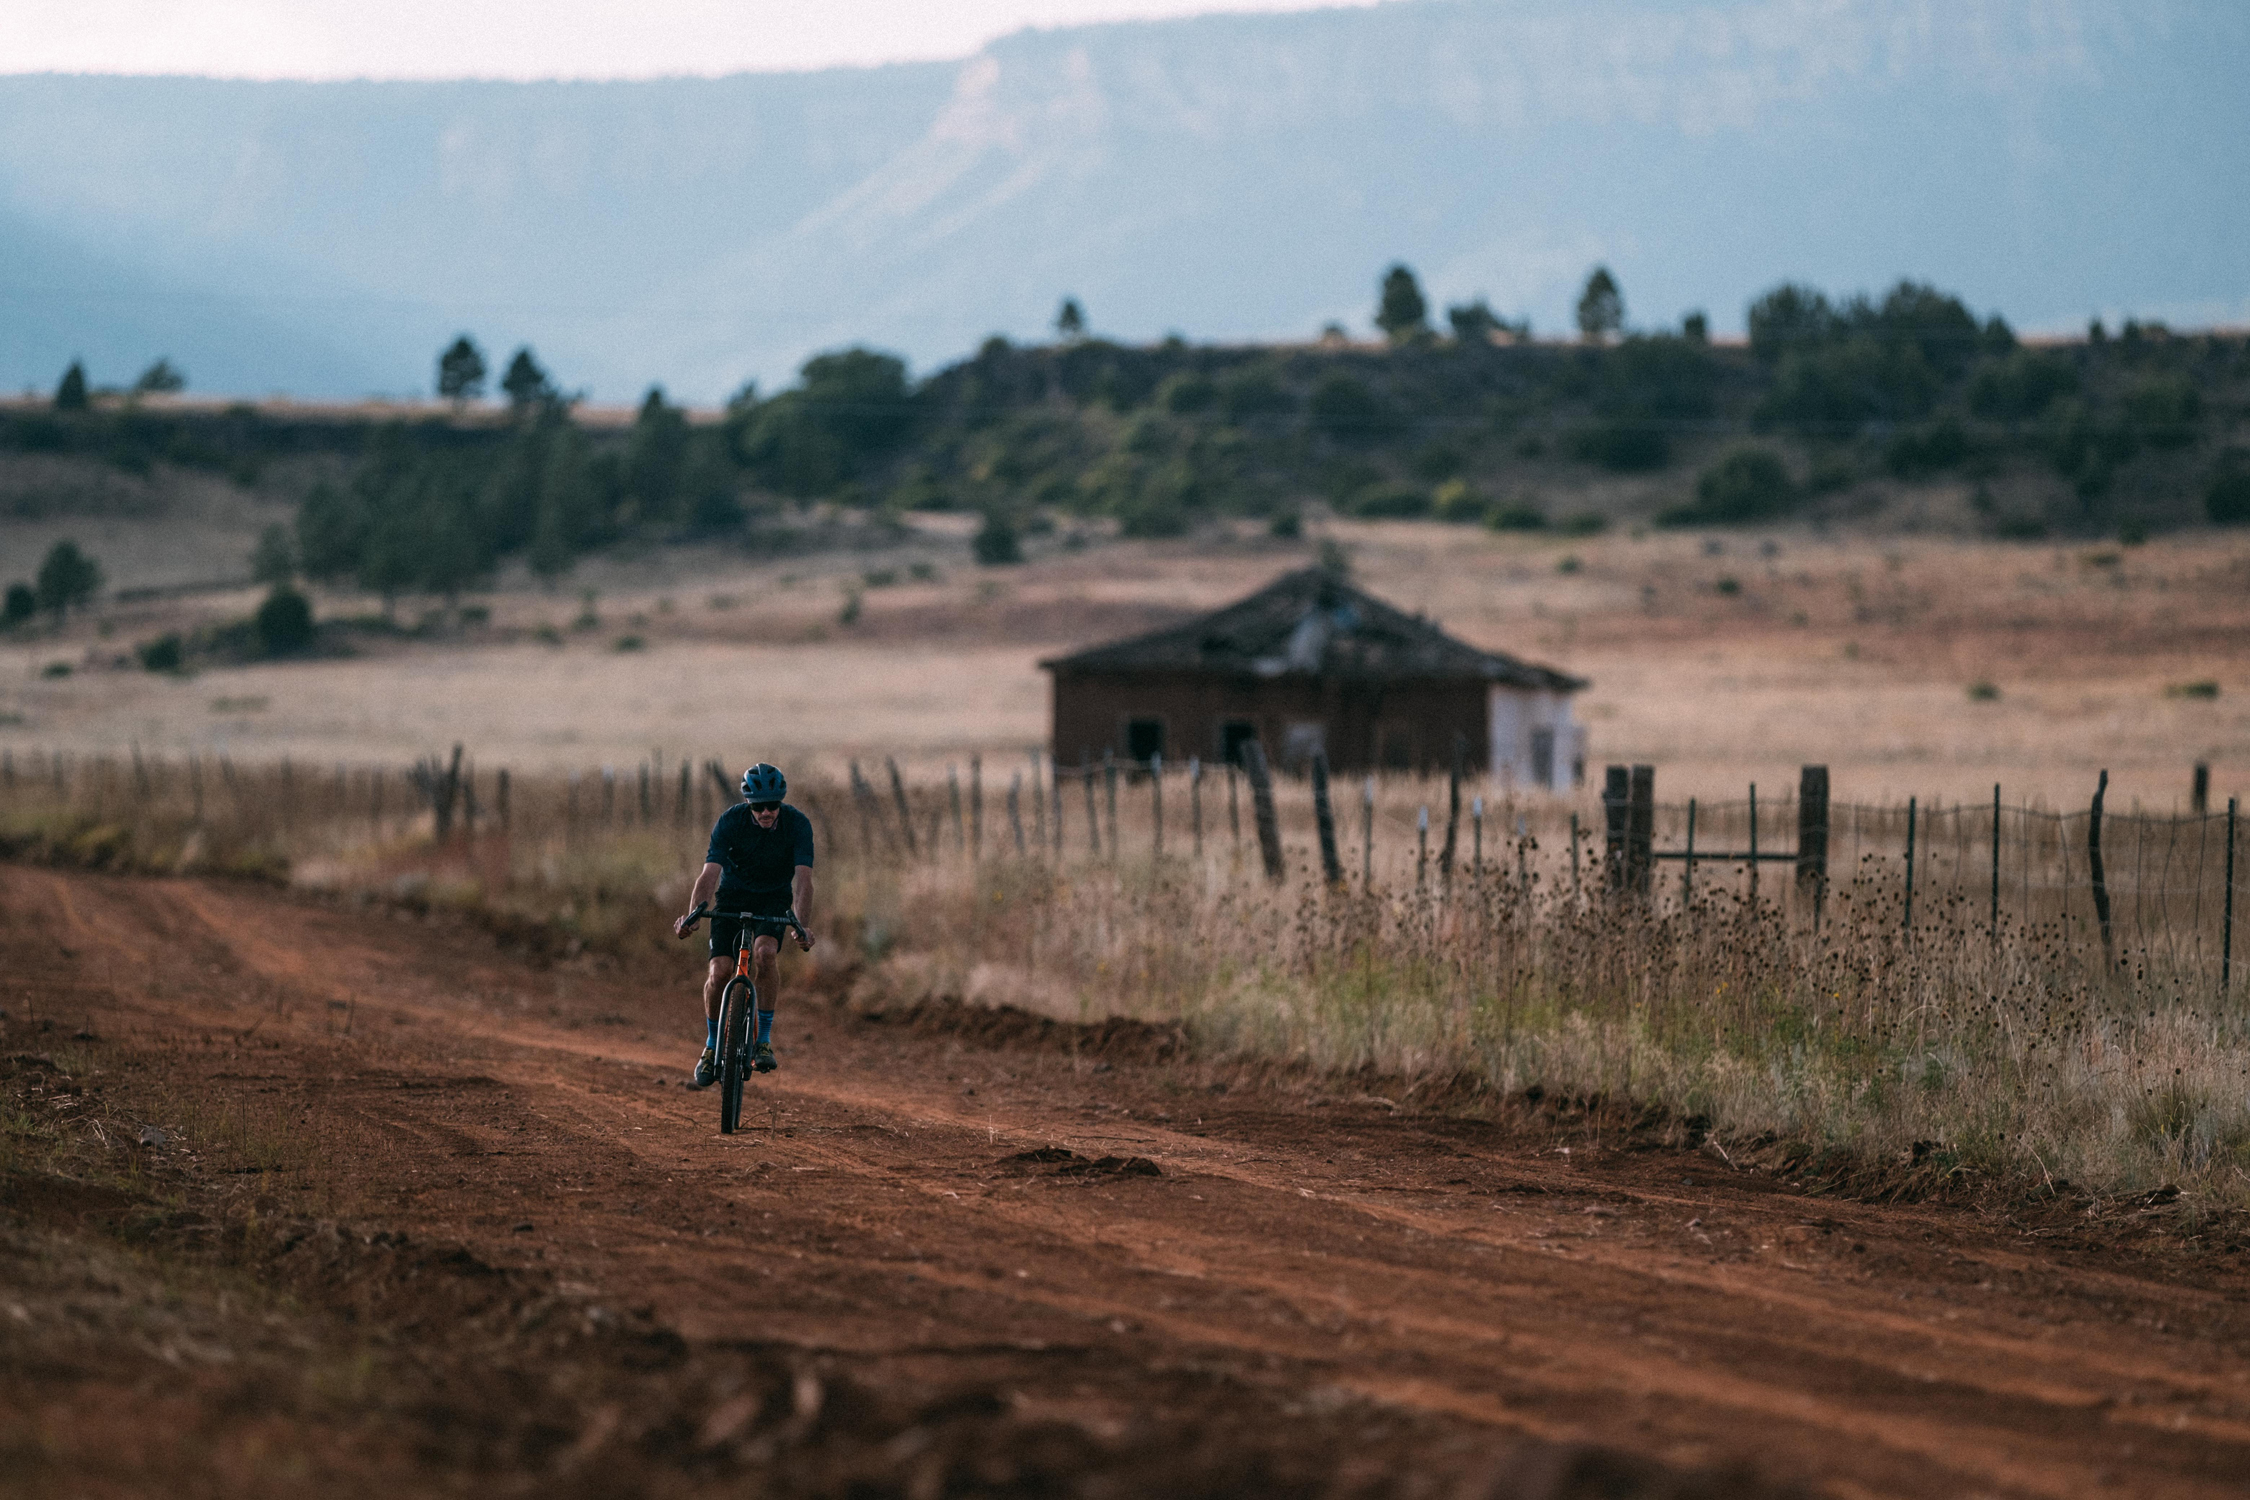 Alex Morgan riding his gravel bike on dirt road in New Mexico